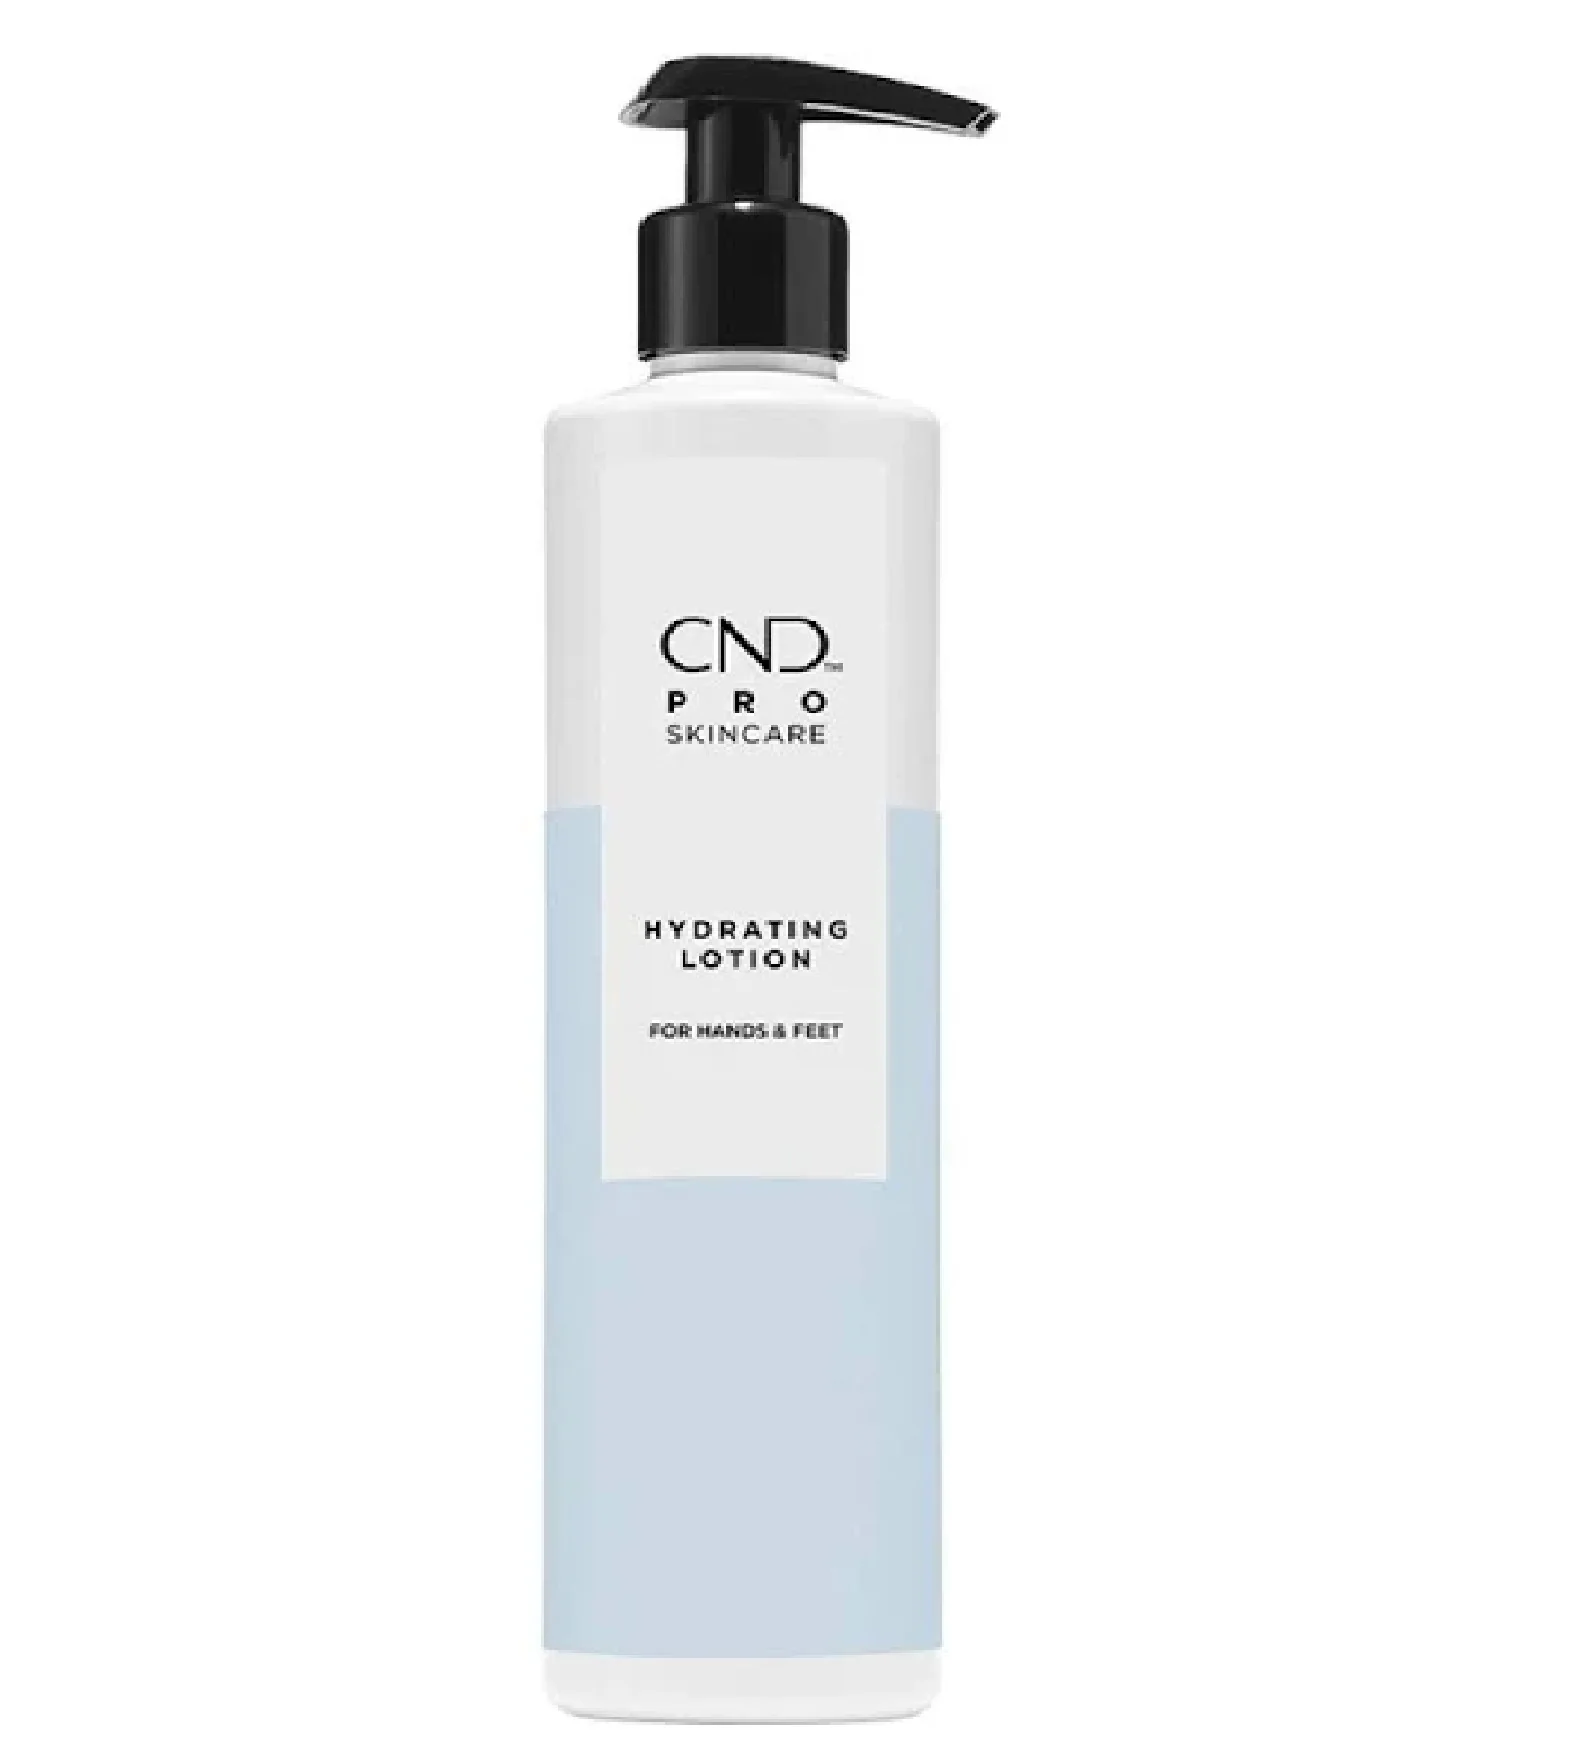 CND Pro Skincare Hydrating Lotion For Hands & Feet 10.1oz